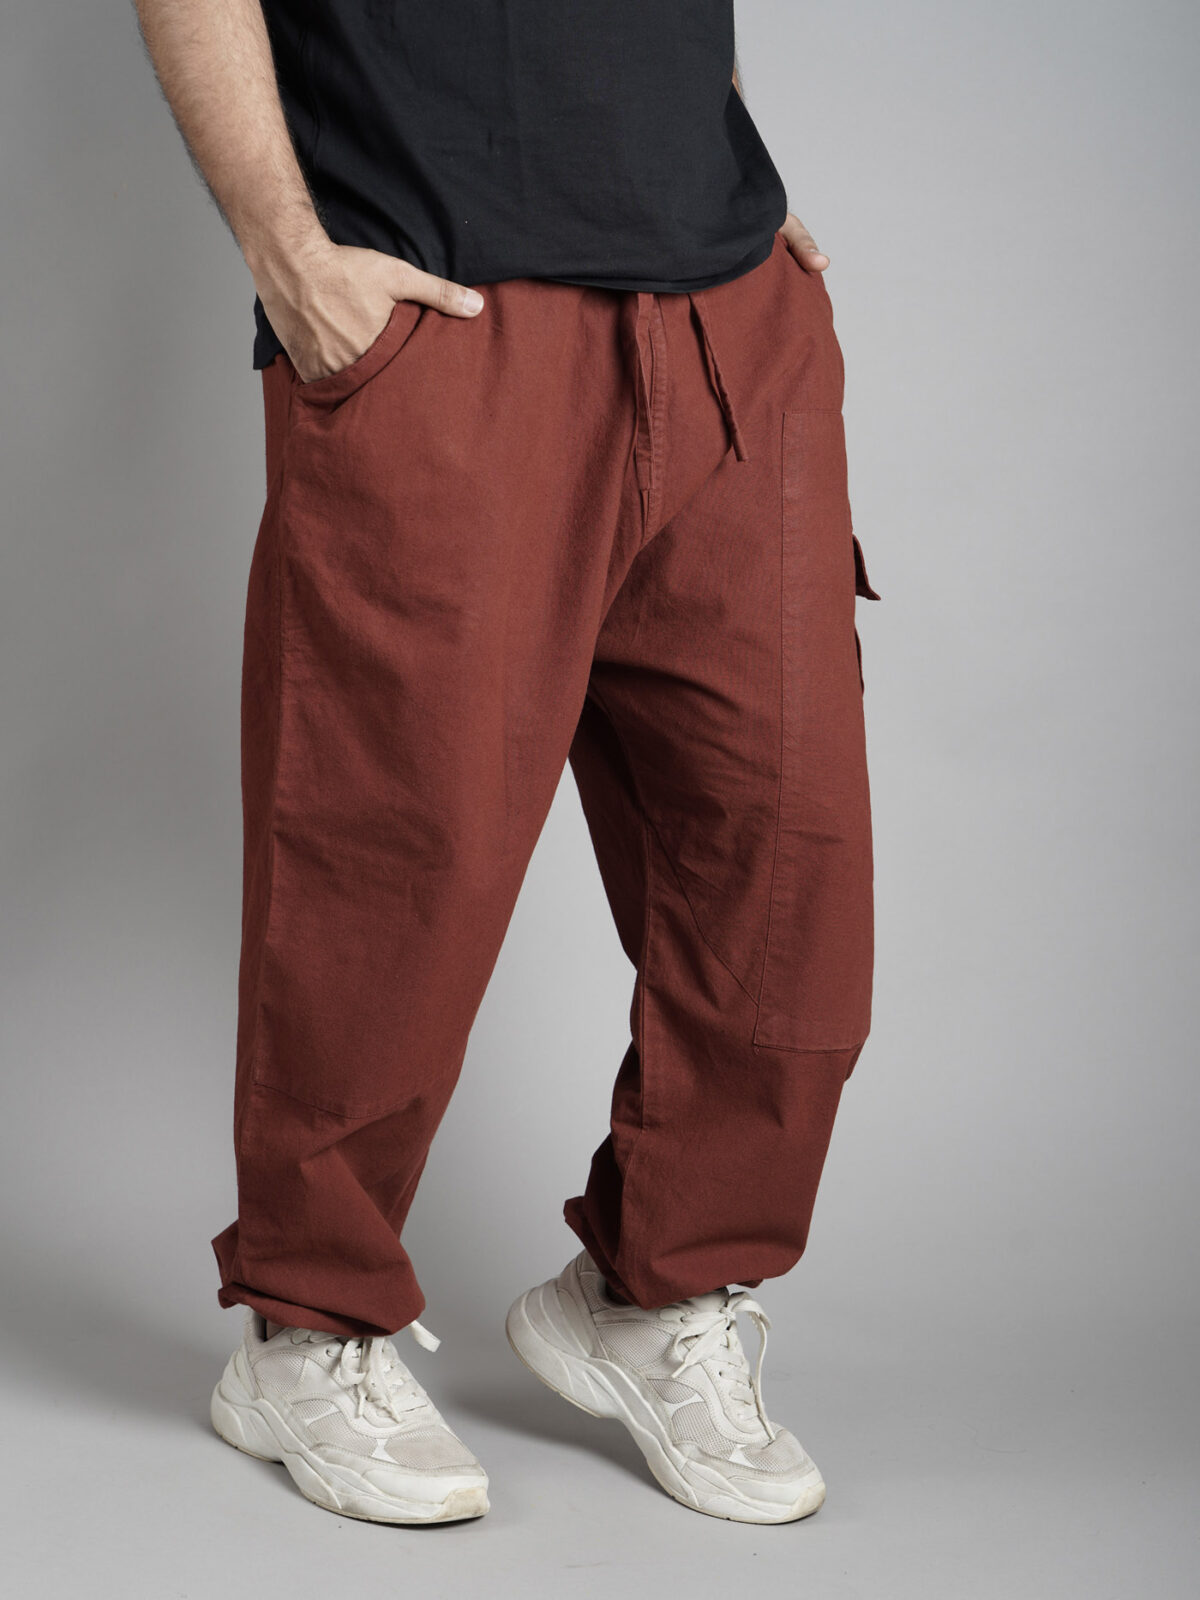 Solid Maroon Earthy Hoppers – Unisex Pants For Men And Women - Bombay ...